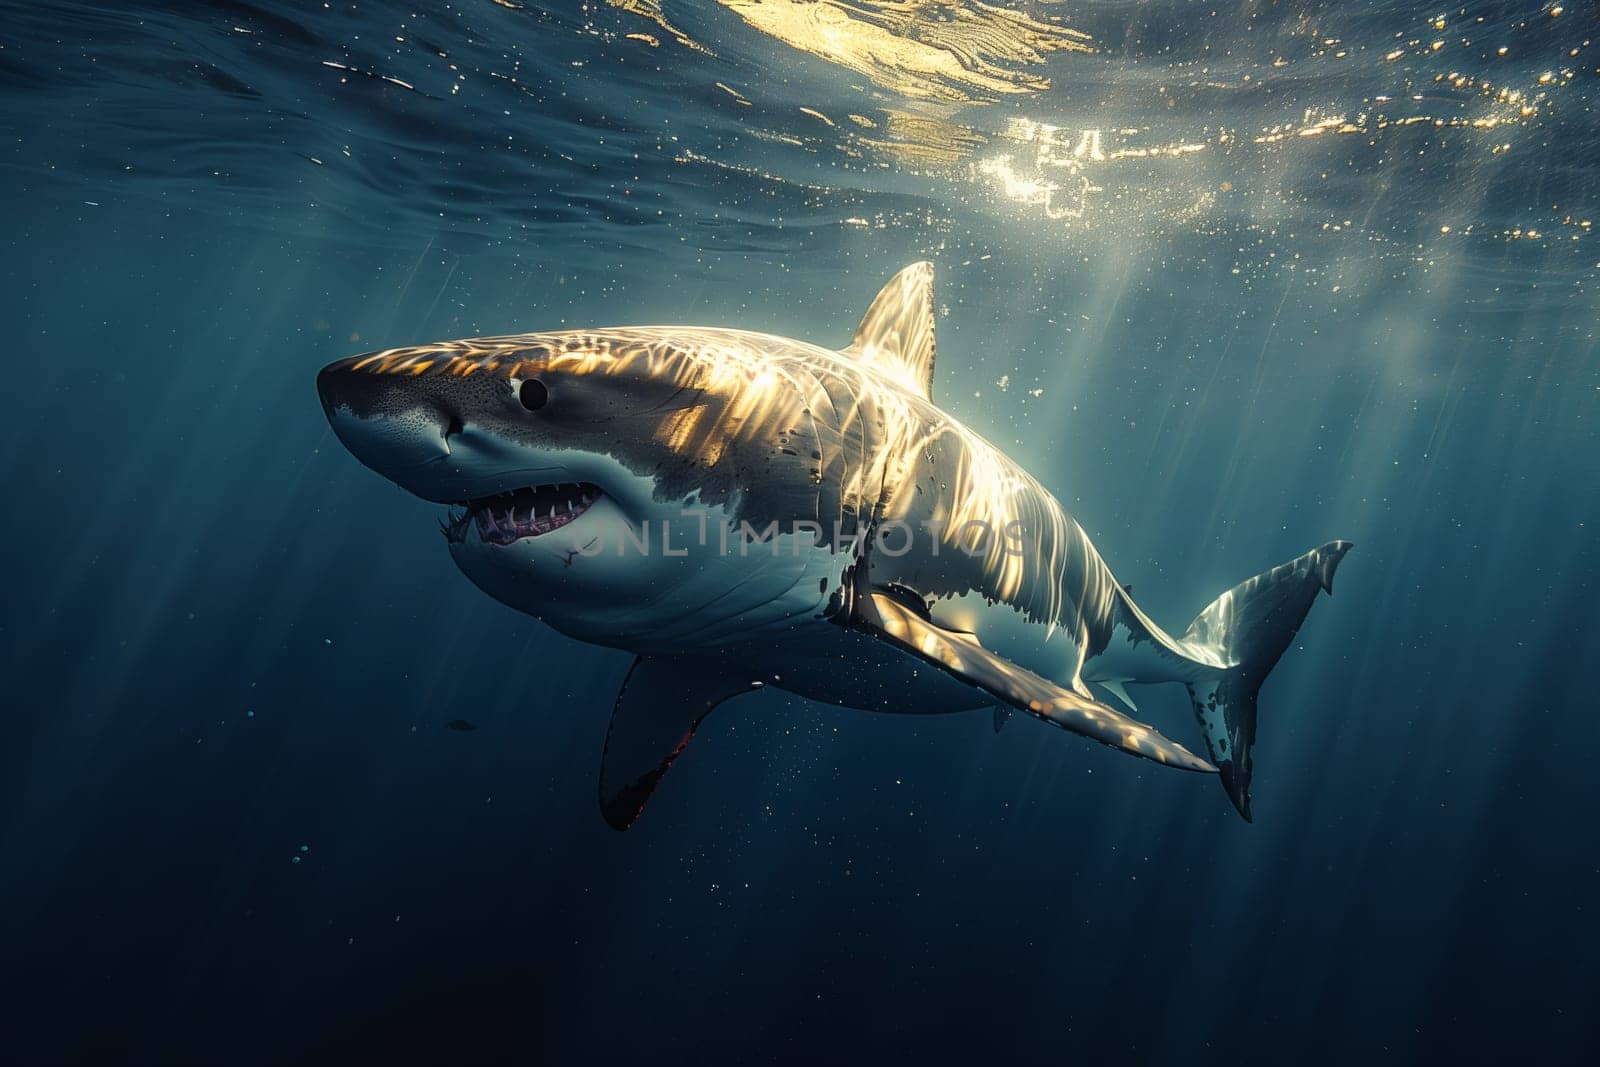 A great white shark, a vertebrate from the Lamnidae family of sharks in the order Lamniformes, is gracefully swimming in the liquid environment of the ocean